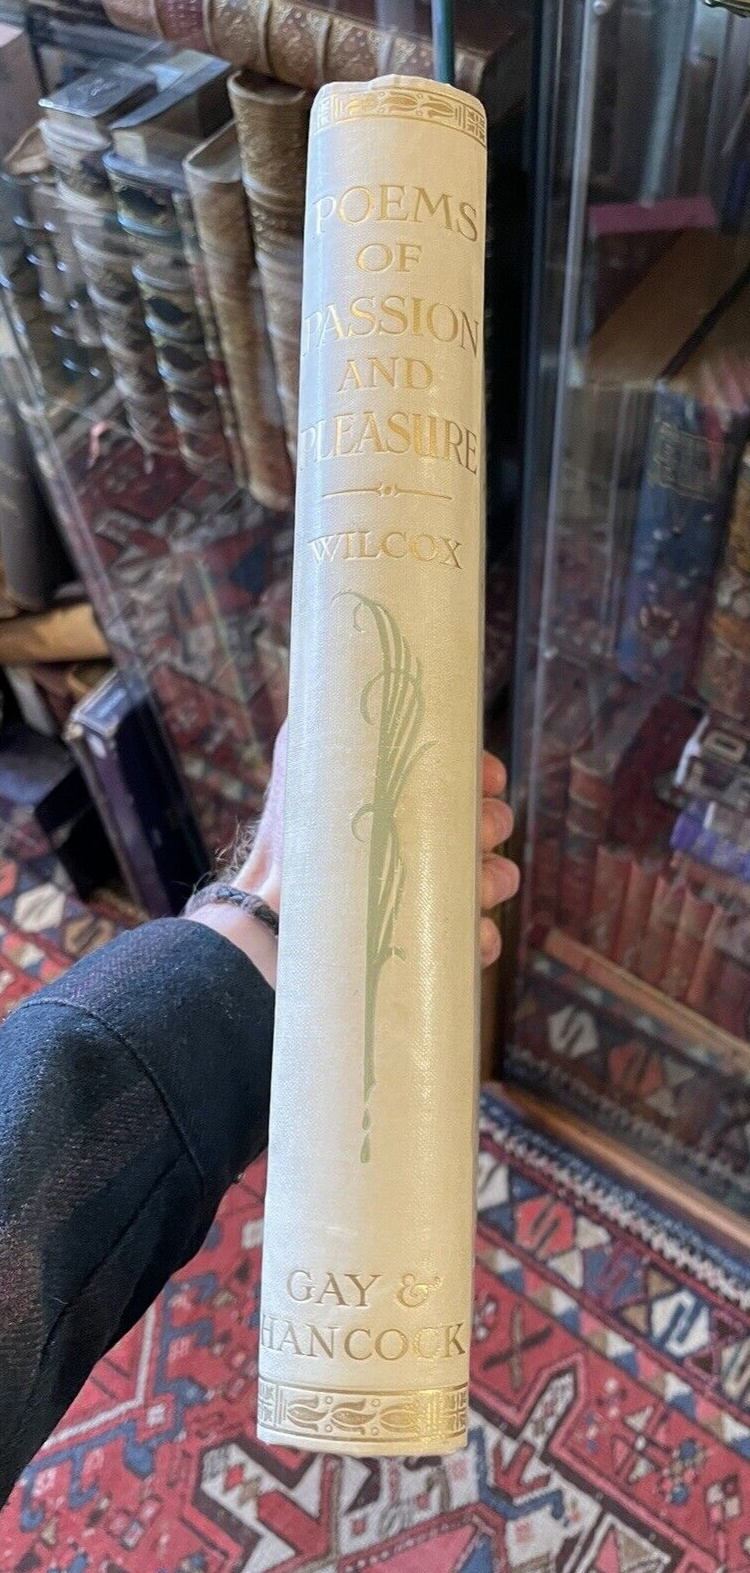 1914 ELLA WHEELER WILCOX Poems of Passion and Pleasure STUNNING ILLUSTRATED BOOK